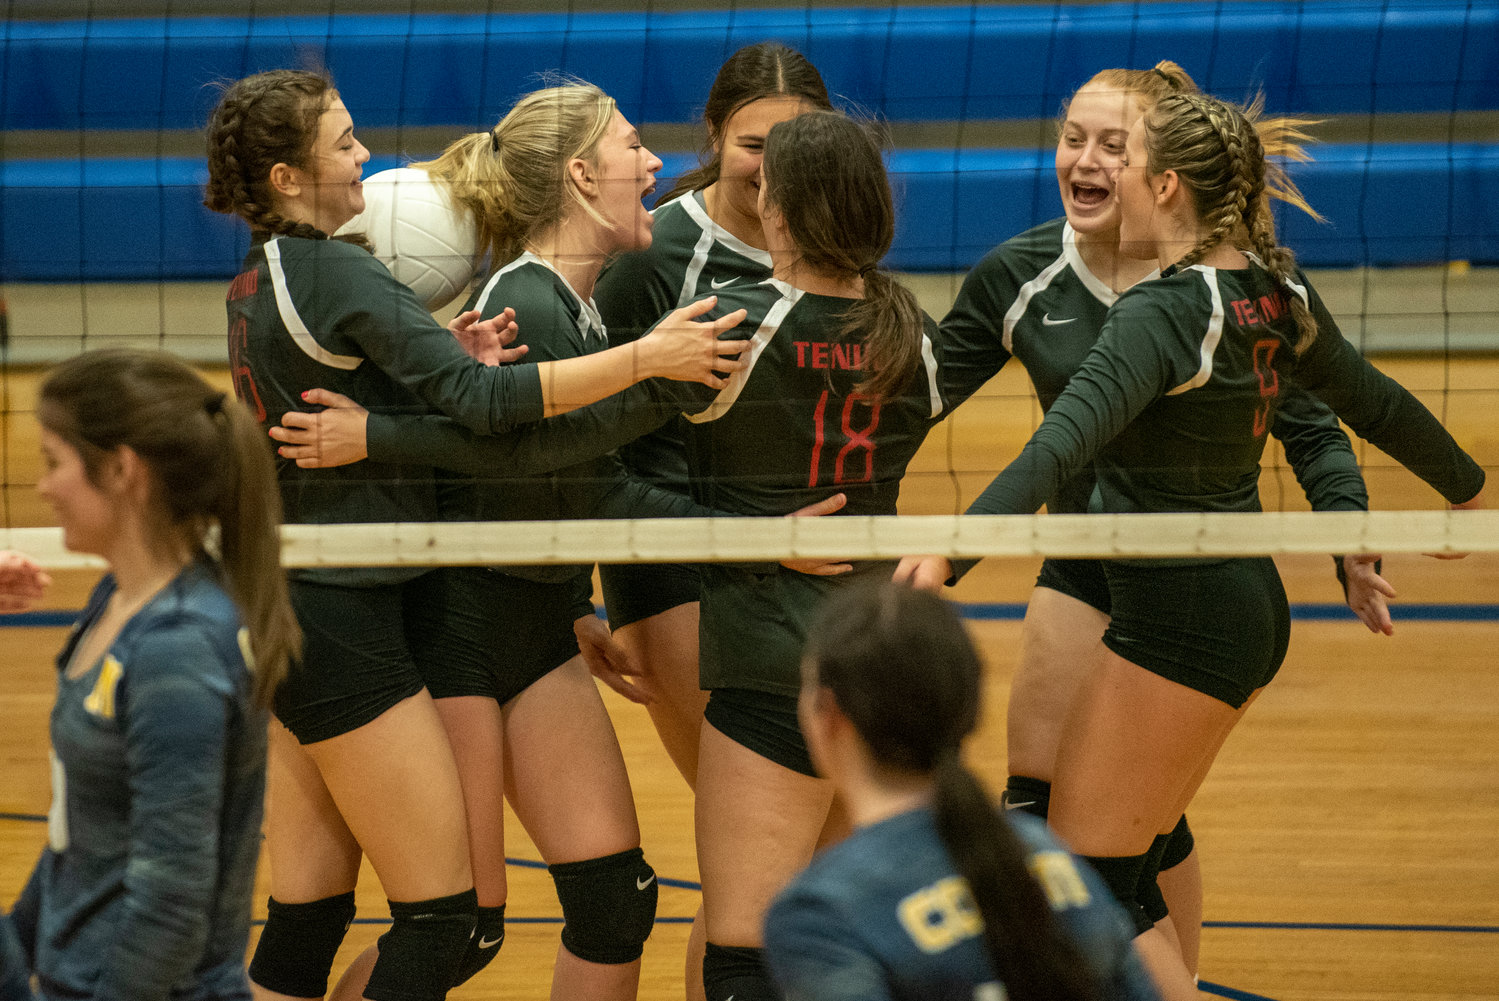 Tenino players celebrate scoring a point against Naselle on Saturday.